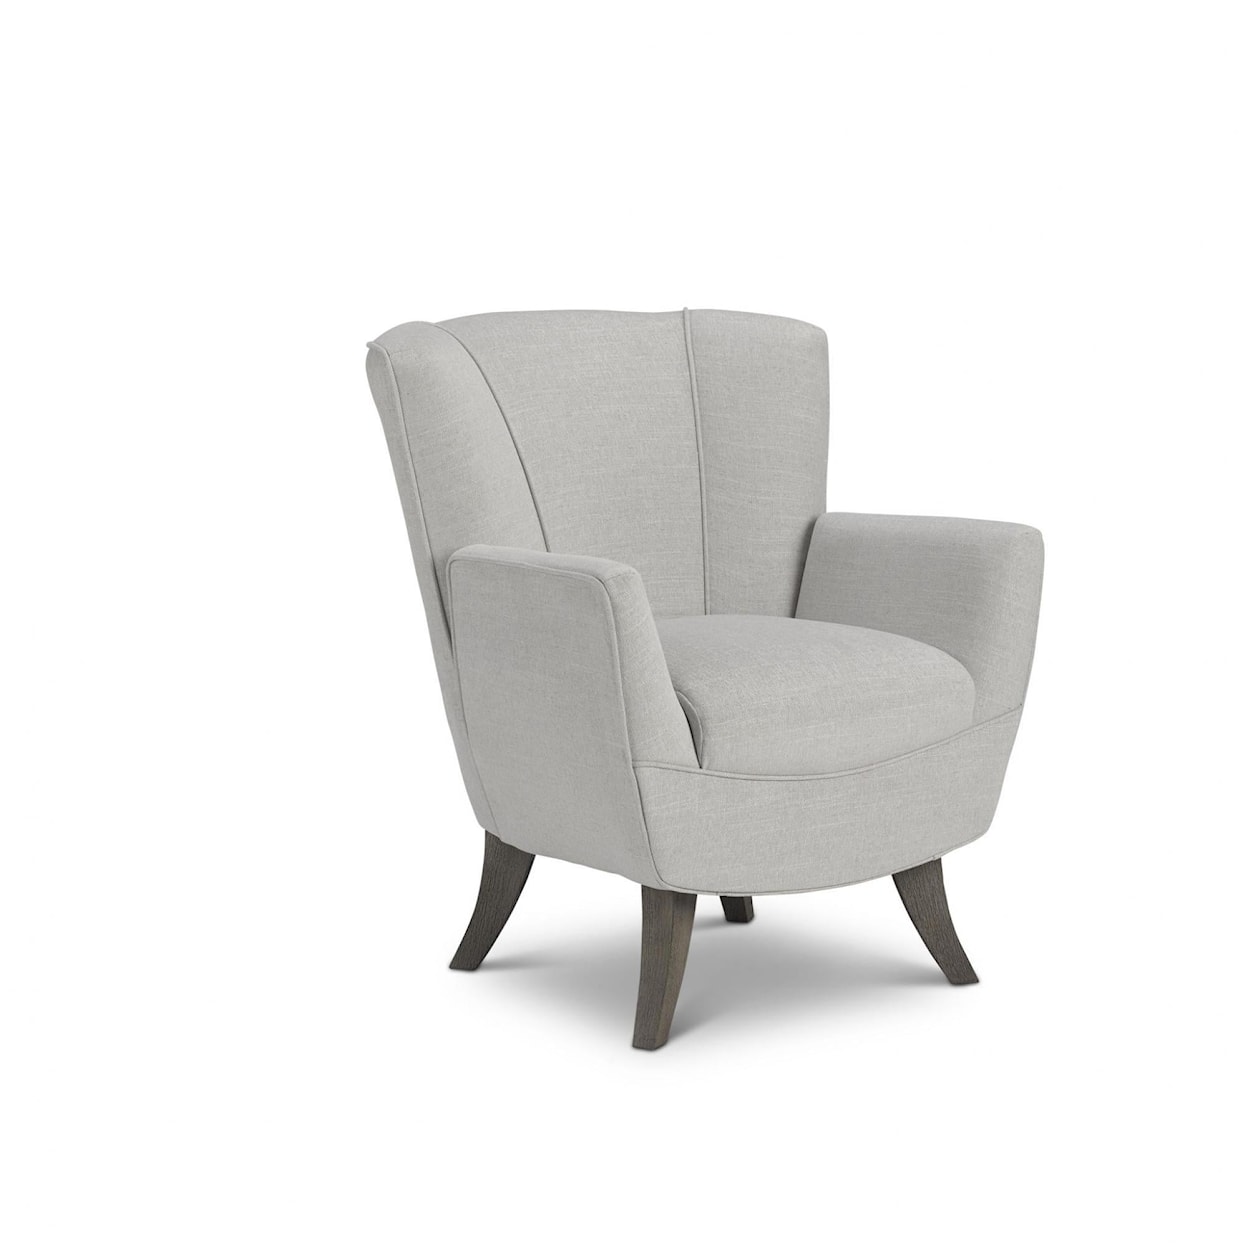 Bravo Furniture Bethany Accent Chair